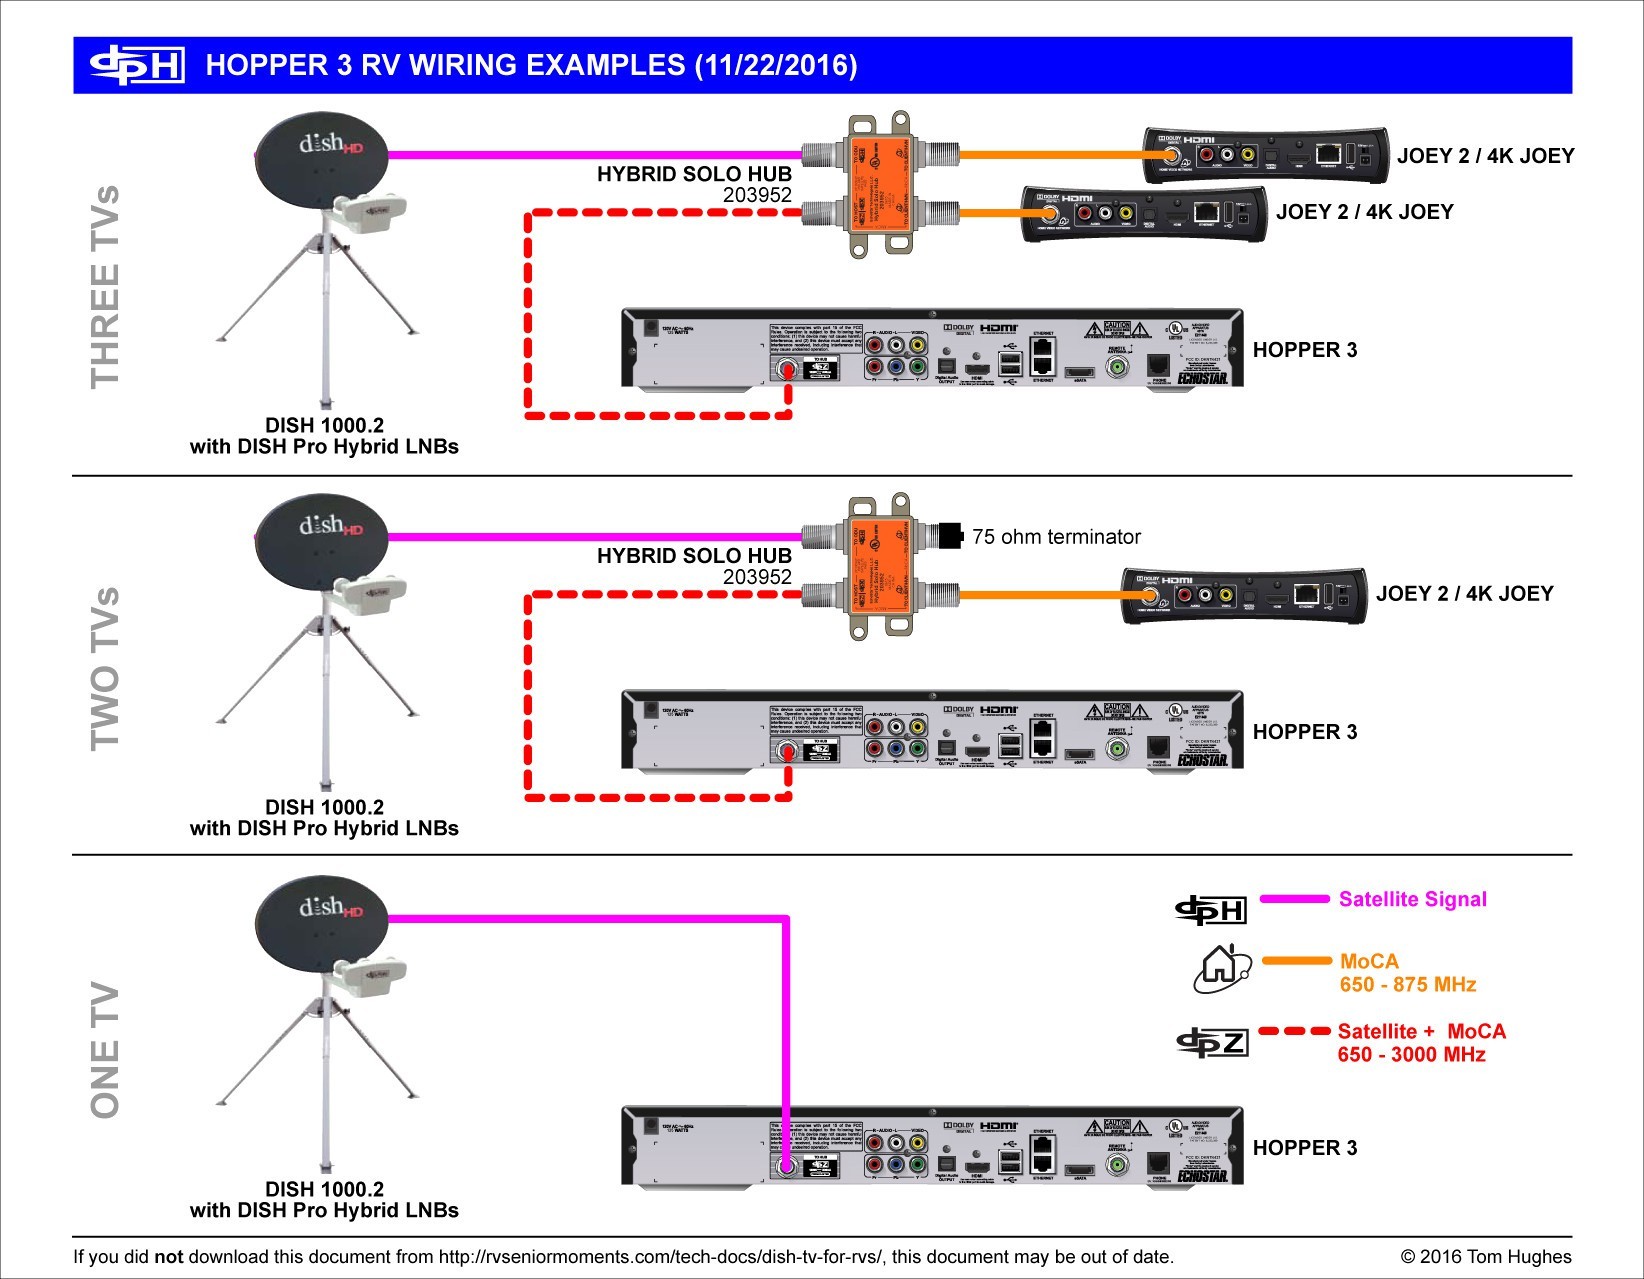 Network Wiring Diagram Best Dish Network Wiring Diagram 722k Cabling Hopper Hd Cable Home and